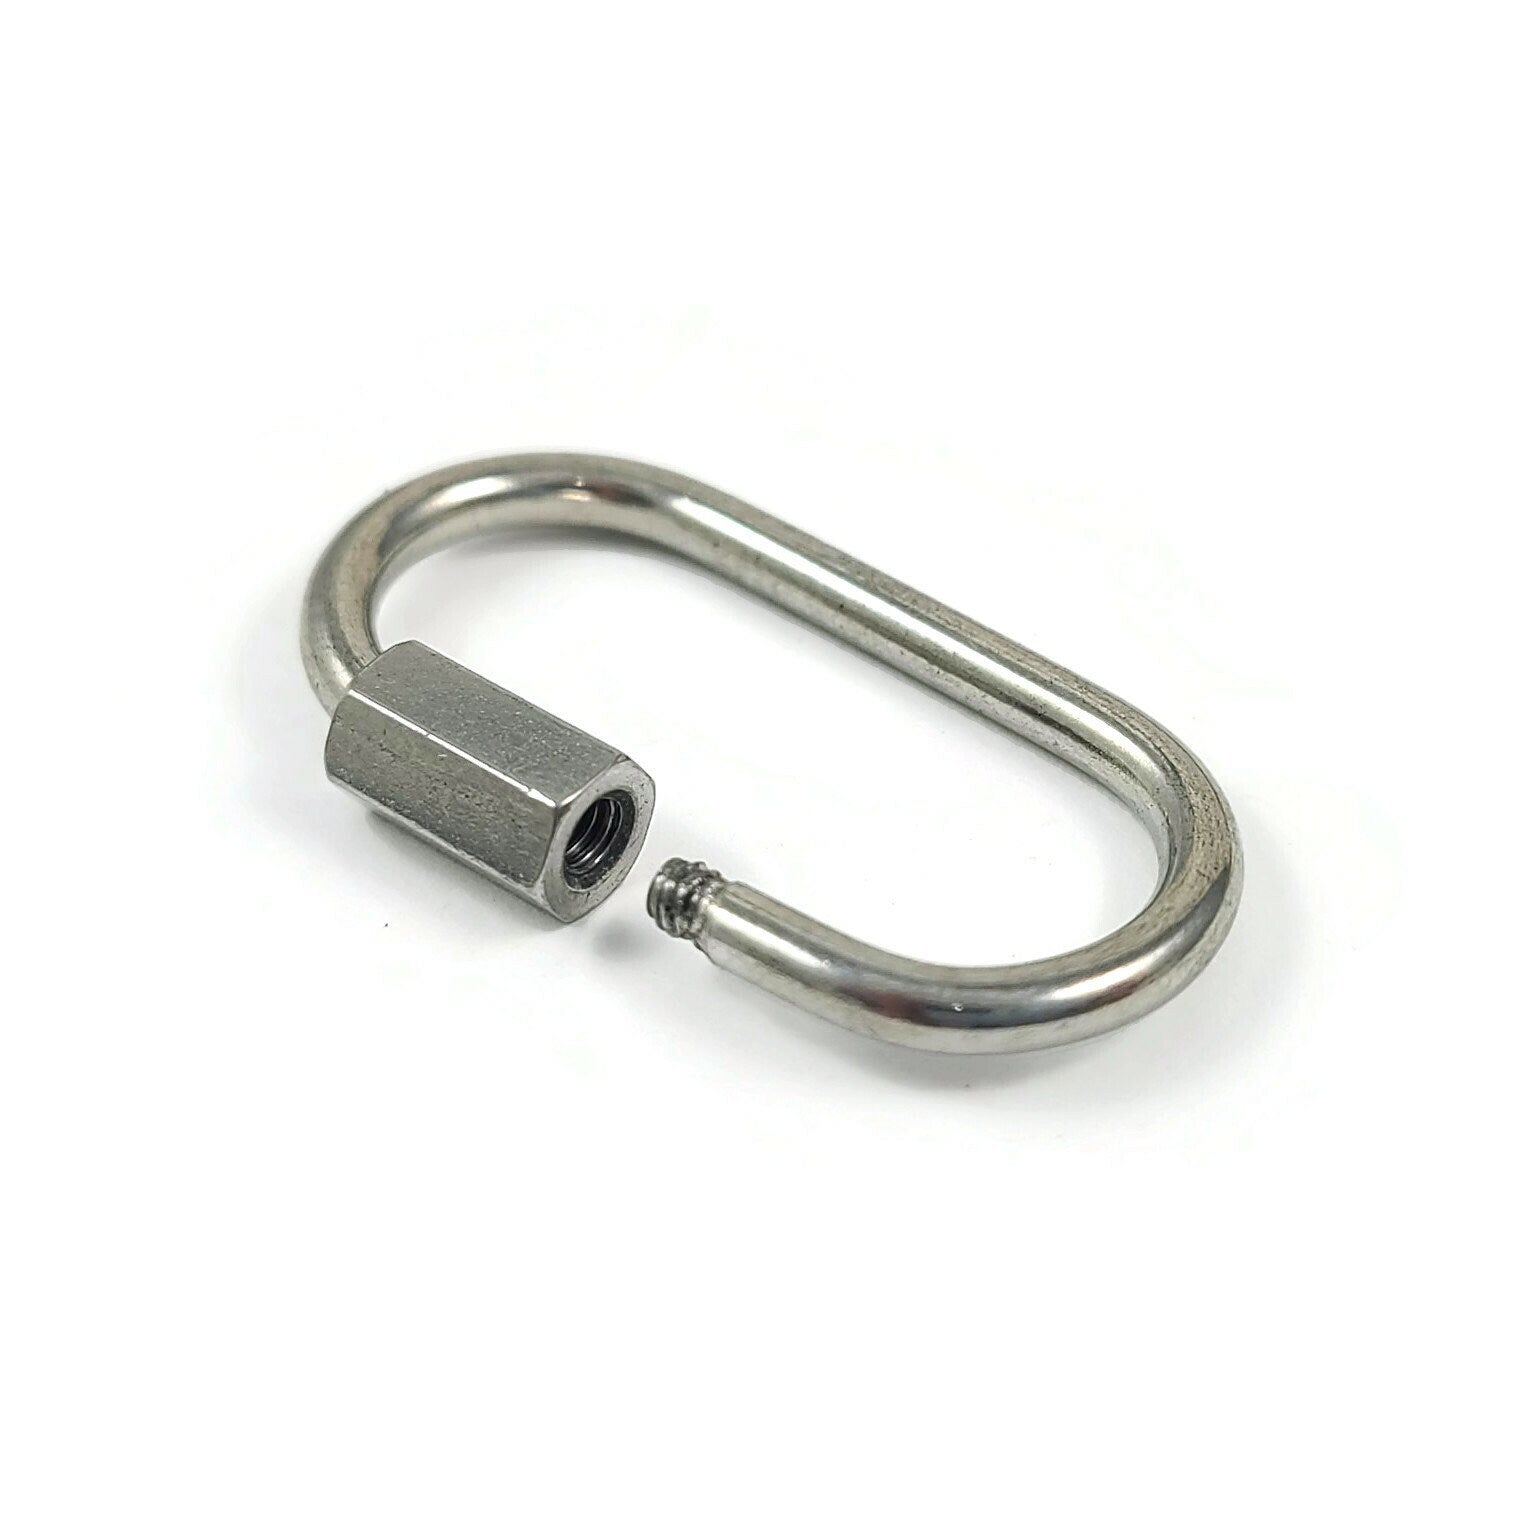 Oval carabiner, Stainless steel clasp, Charm or connector necklace making, Bottle clip & key fob findings